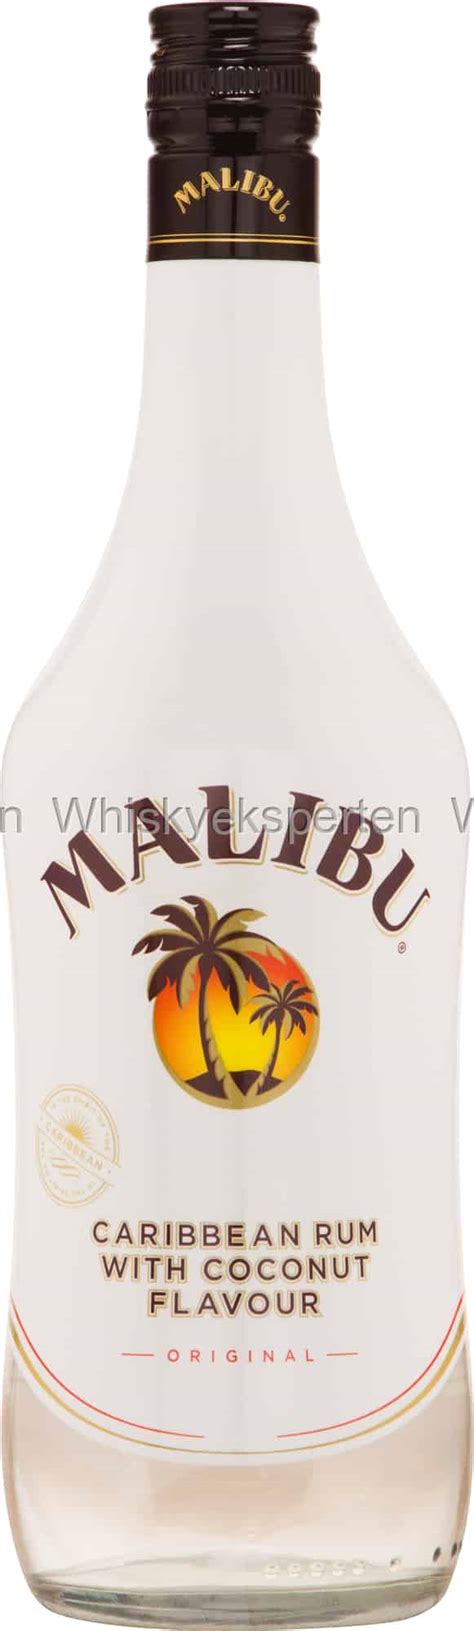 With the coconut flavor and the pineapple, it has a similar flavor profile to a piña colada or any other fruity drink you'd order at the. Malibu Caribbean Rum With Coconut Liqueur / Malibu - Red - Caribbean Rum, Tequila, and Coconut ...